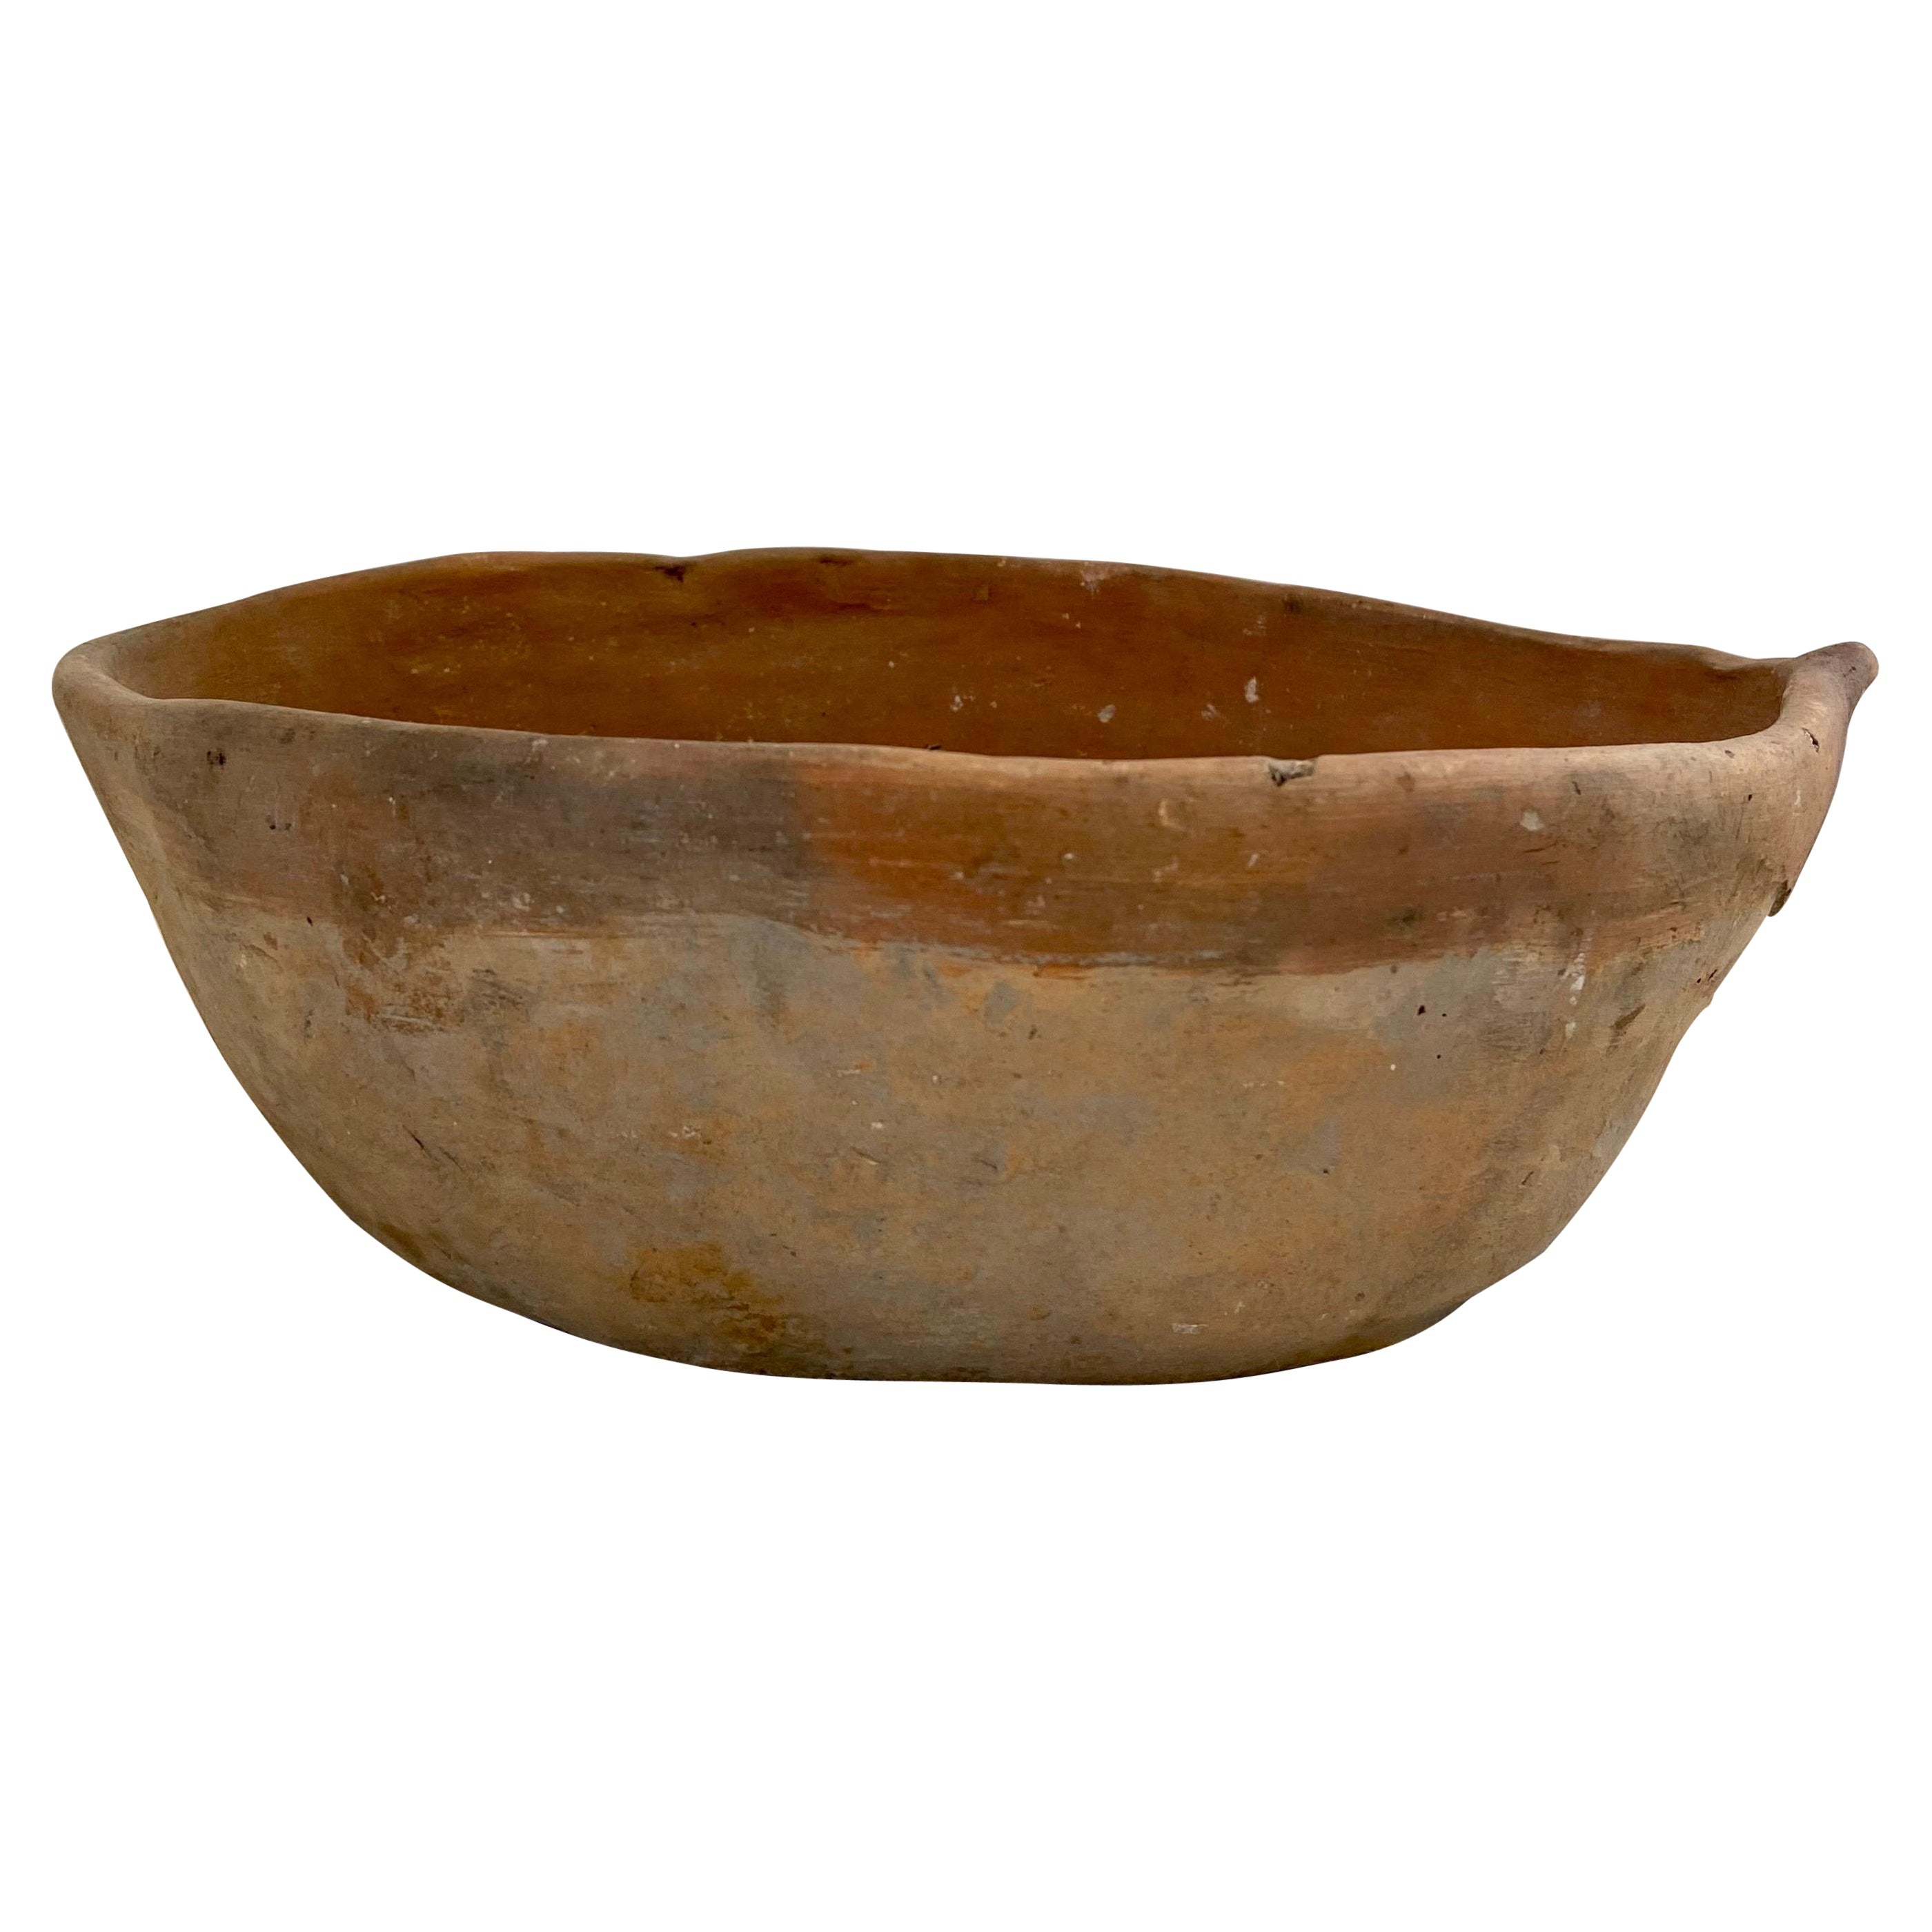 Mid-20th Century Terracotta Bowl from Mexico